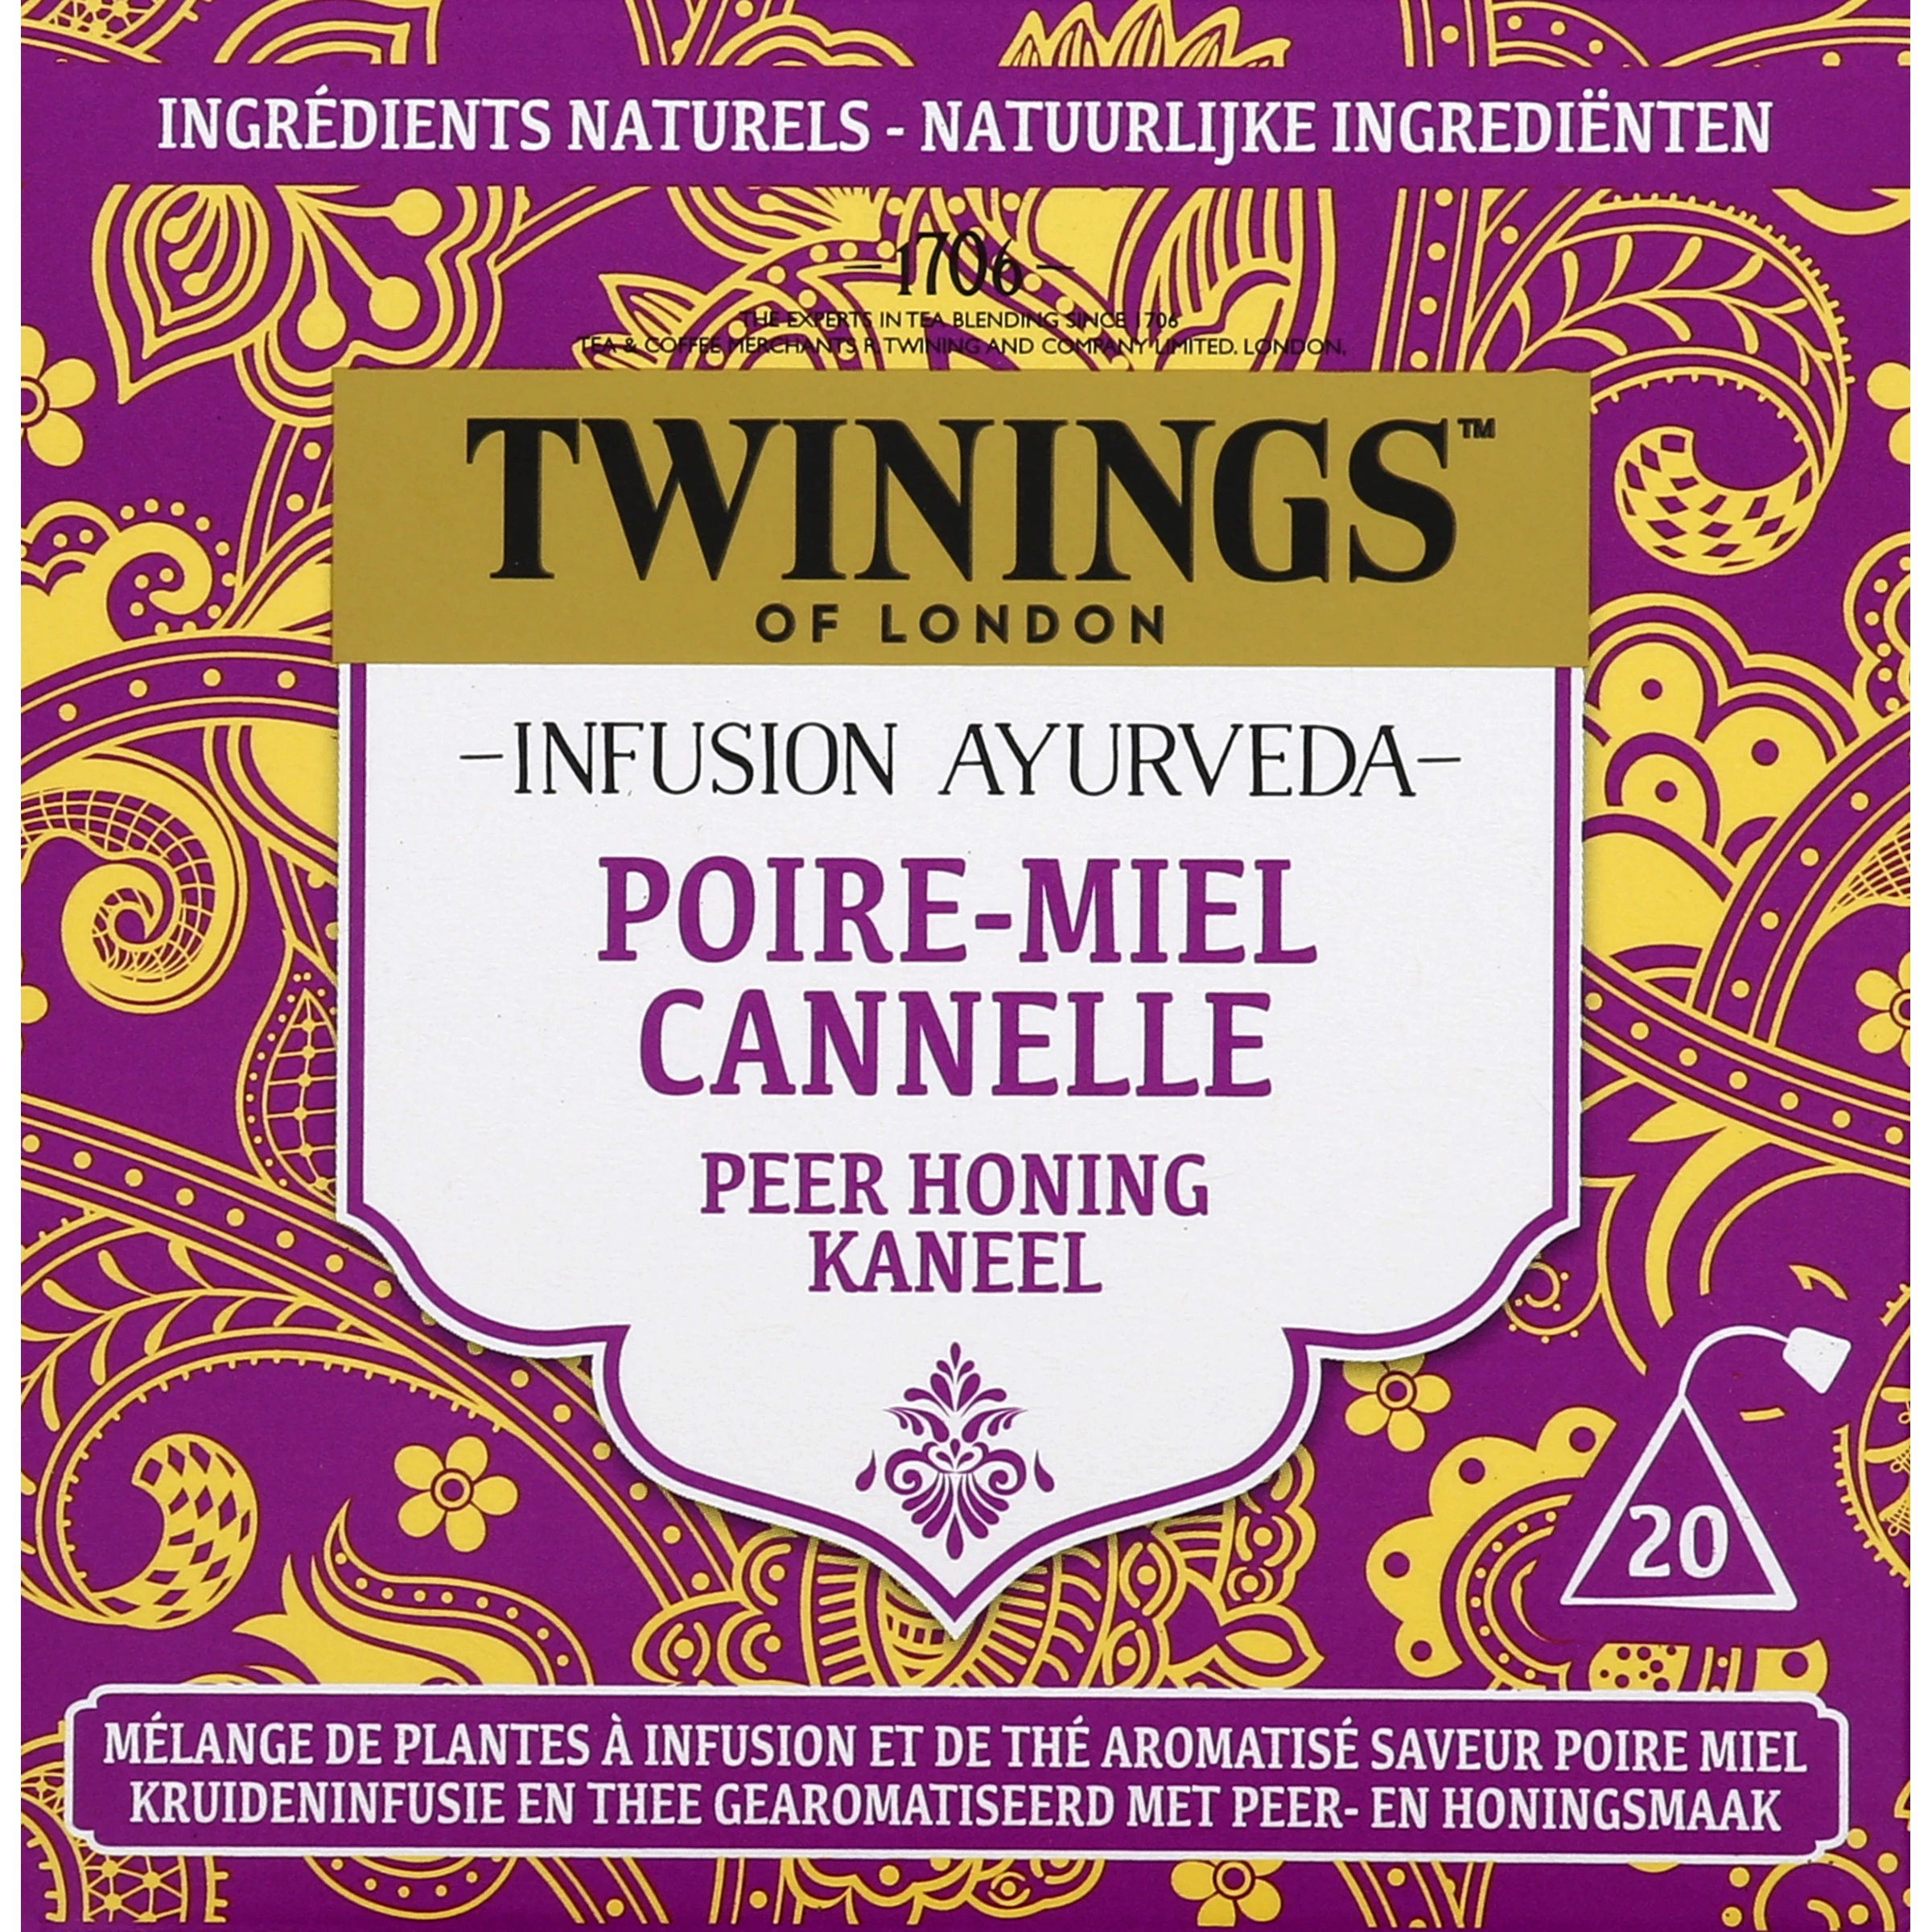 Infusion Ayurveda Poire, Miel, Cannelle x20, 36g - TWINNINGS